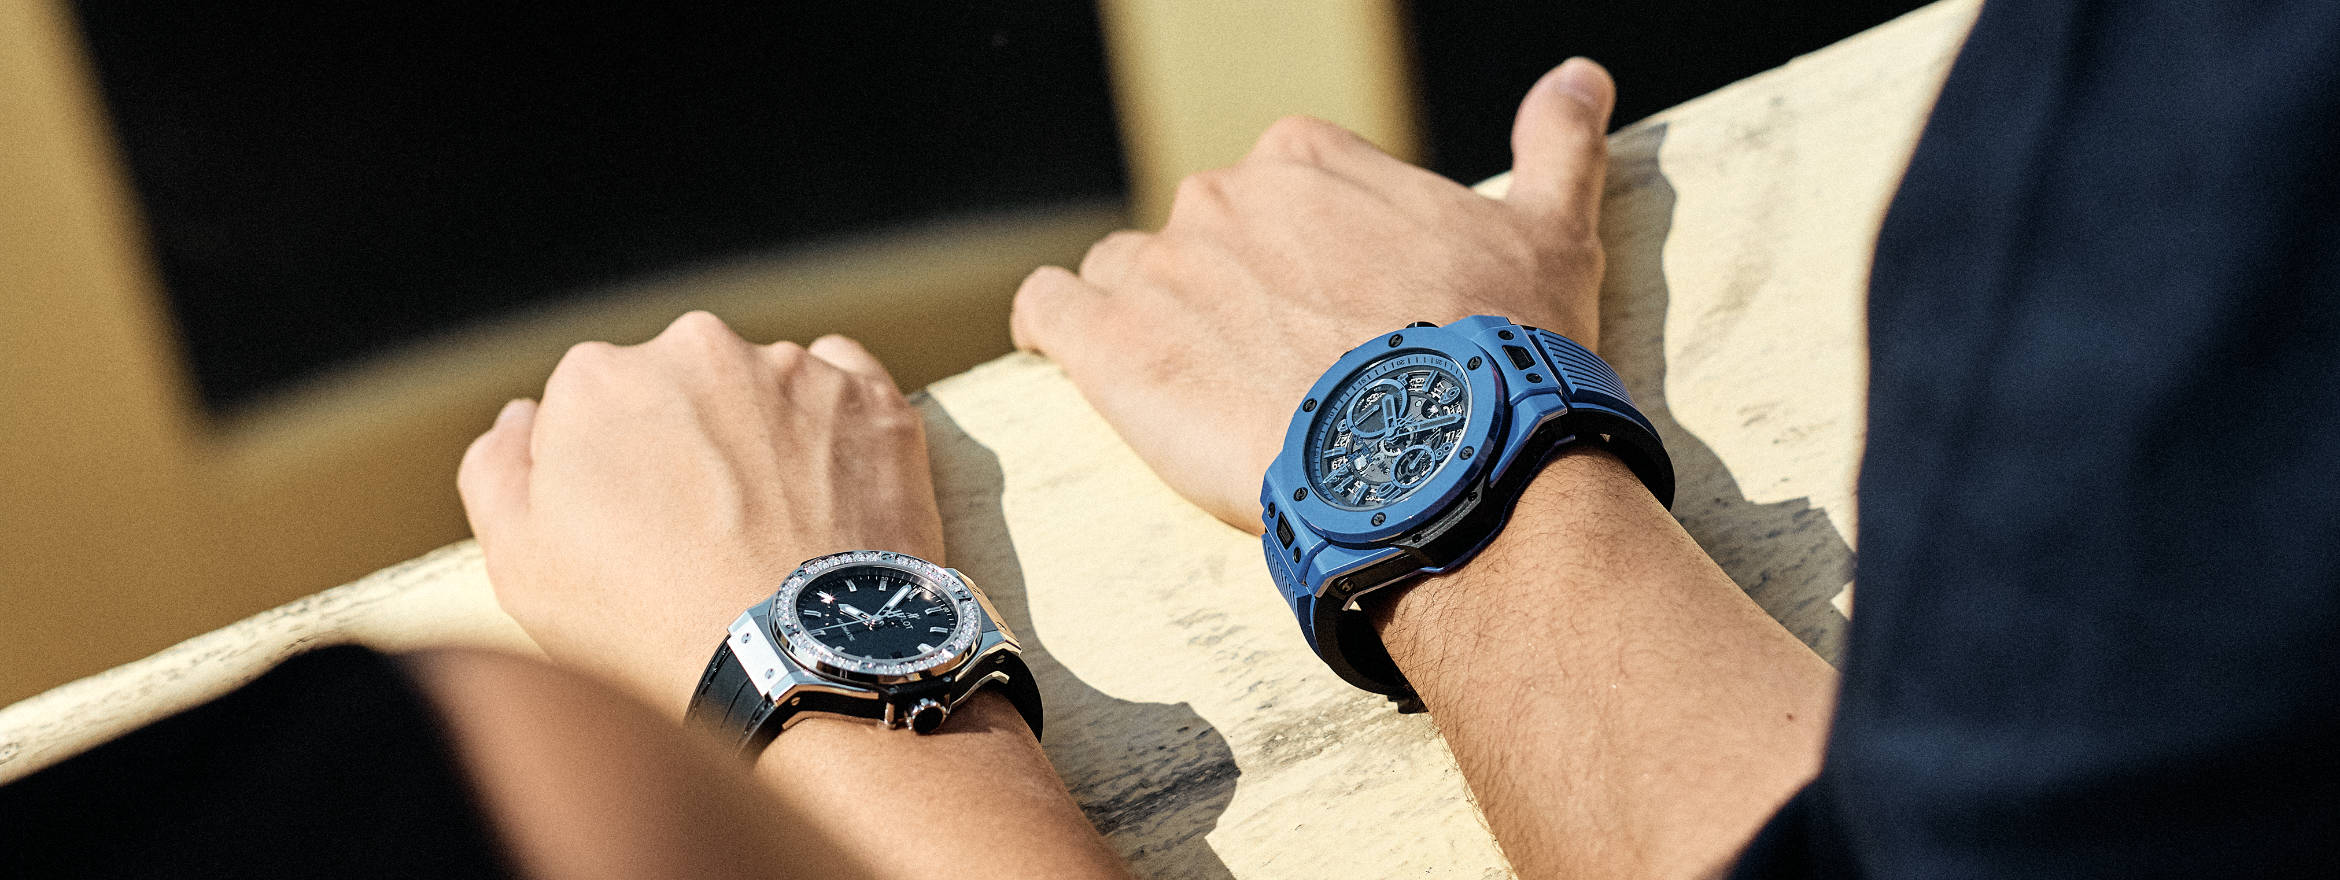 Hublot Watches & How To Wear Them 3